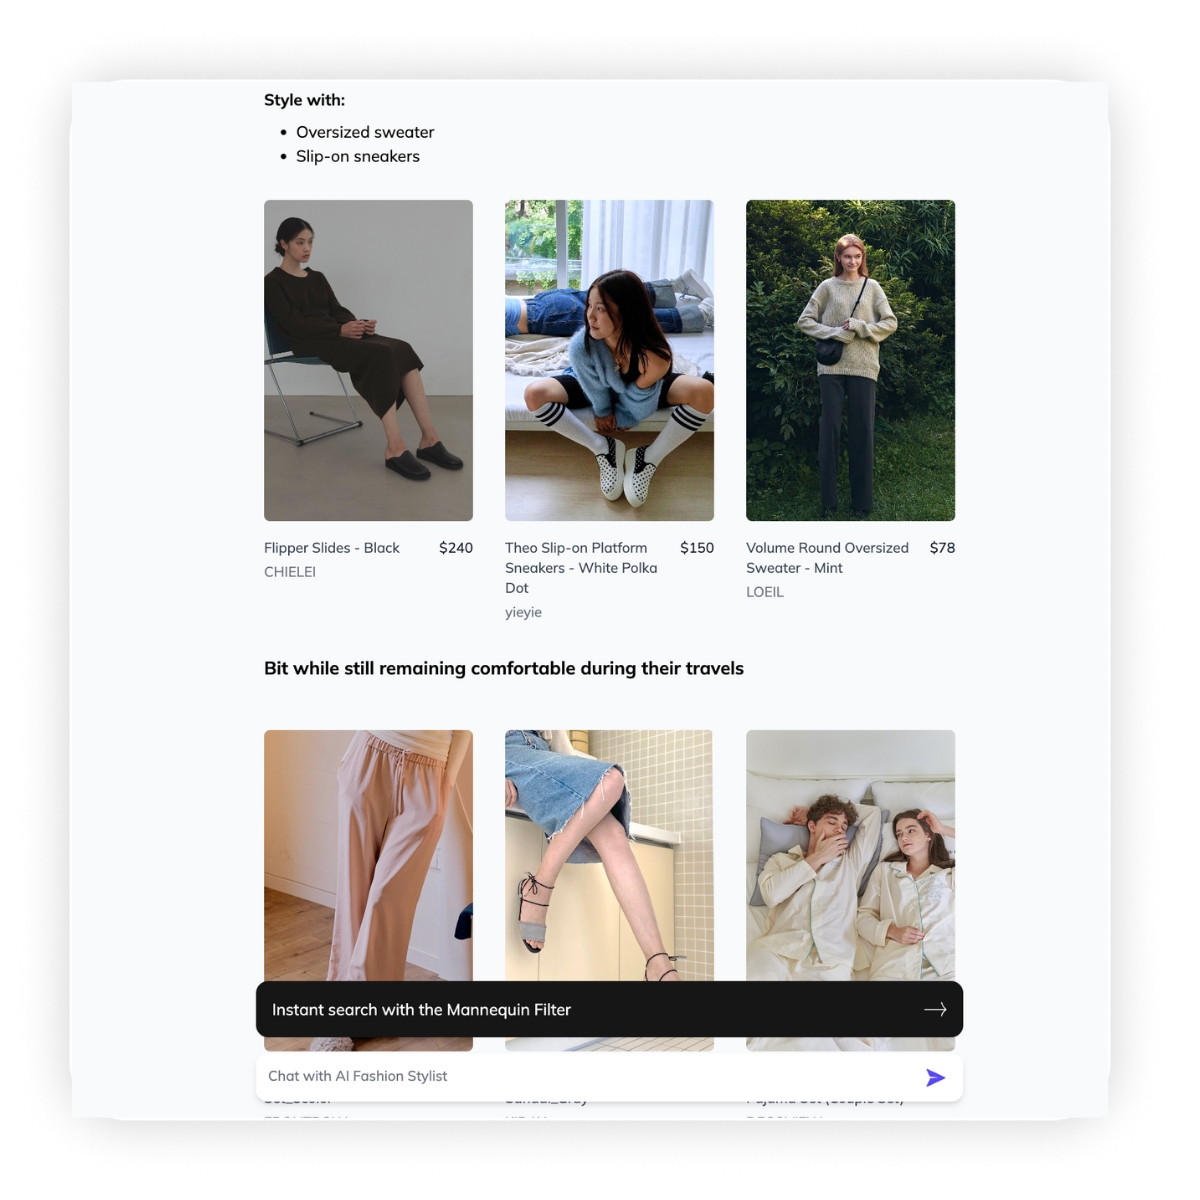 Style with suggestions for chic and comfortable airport outfits using fashion AI